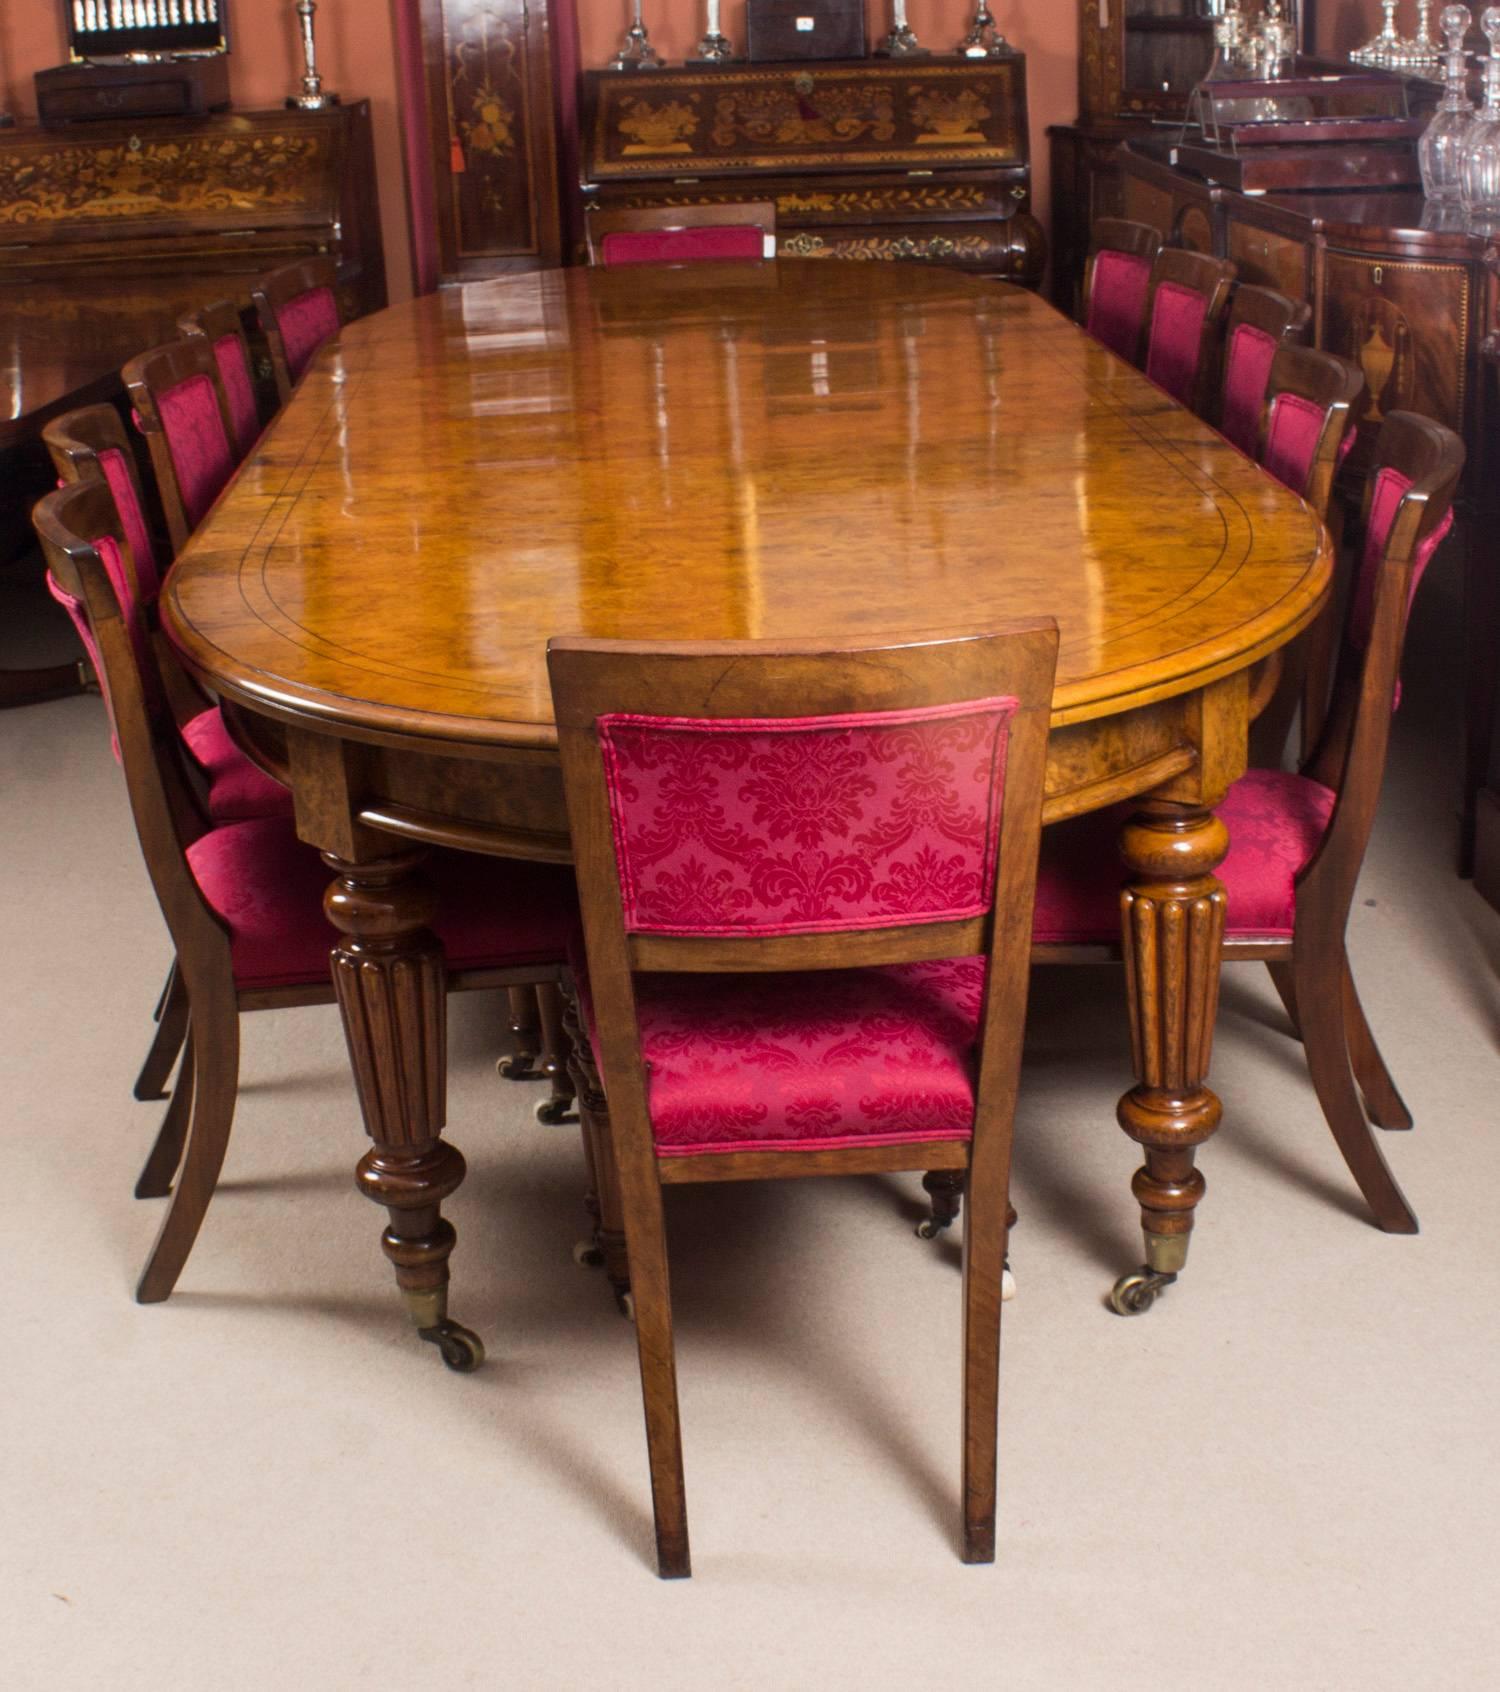 There is no mistaking the style and sophisticated design of this exquisite dining set comprising a rare English antique Victorian pollard oak extending dining table, circa 1840 in date and a set of 12 antique dining chairs, circa 1870 in date. 
The